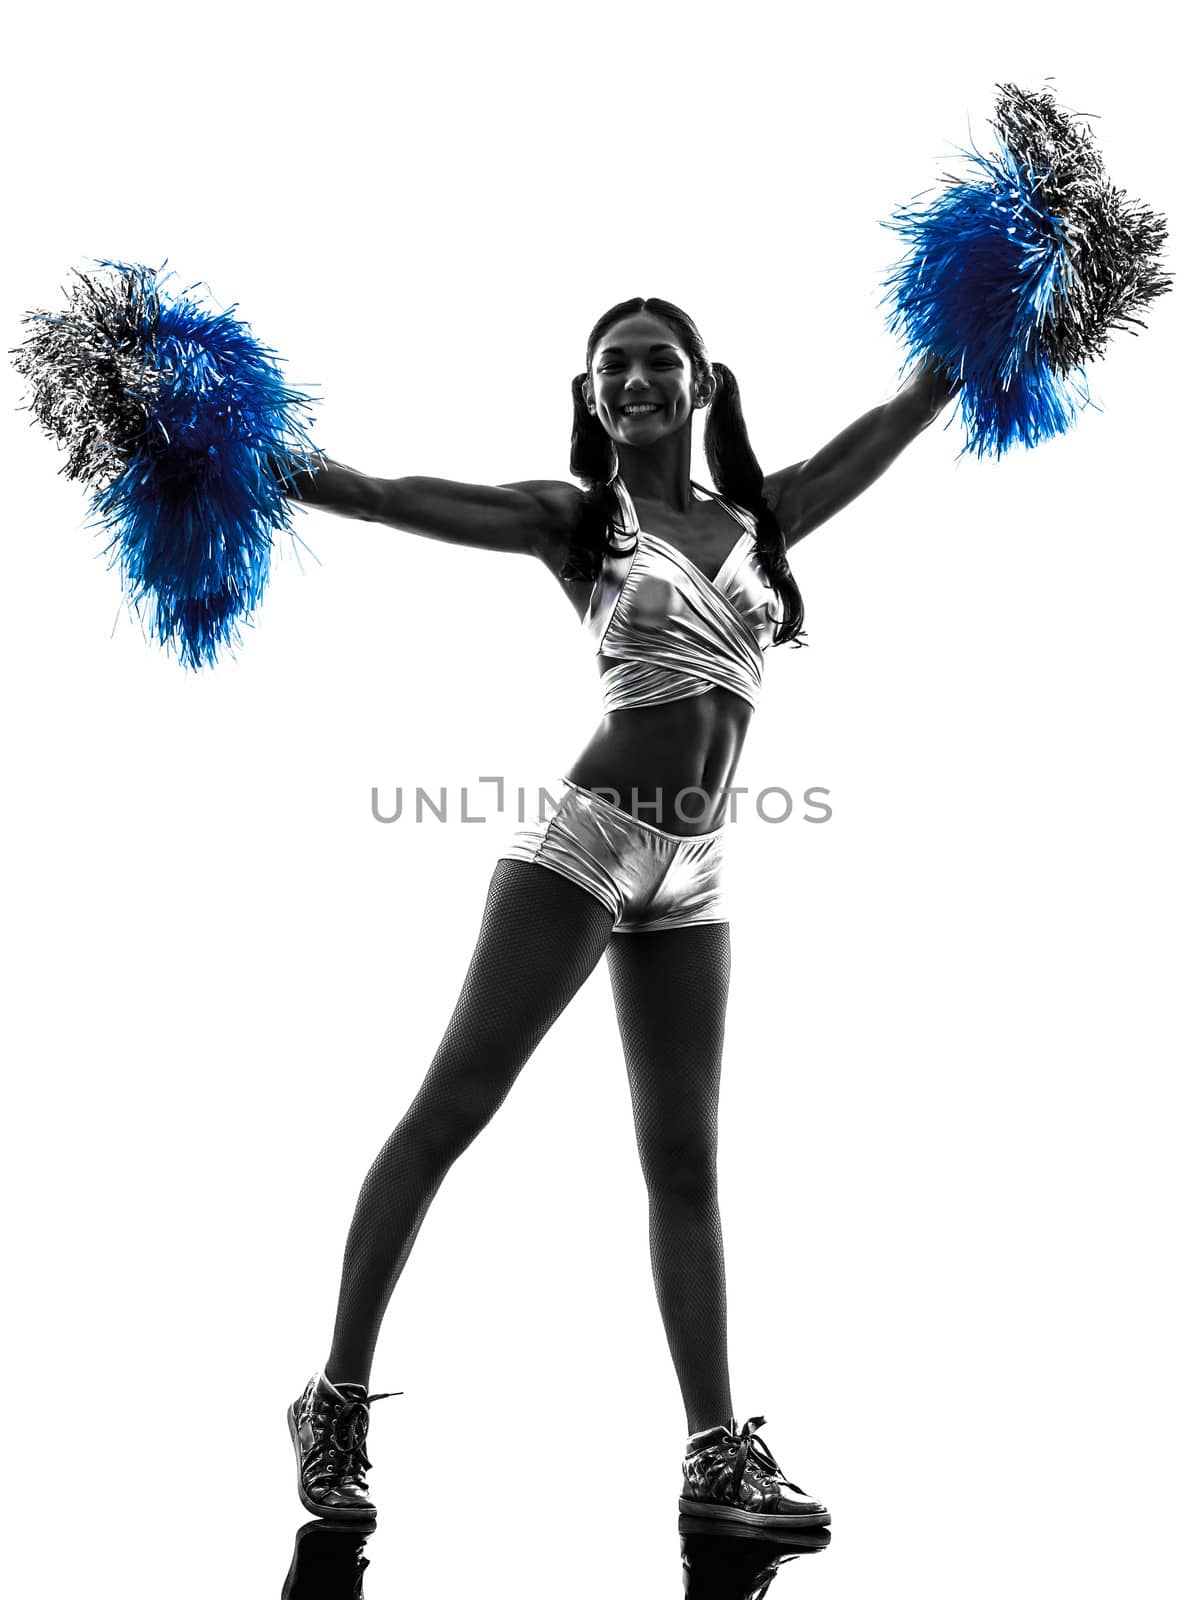 one young woman cheerleader cheerleading silhouette studio on white background